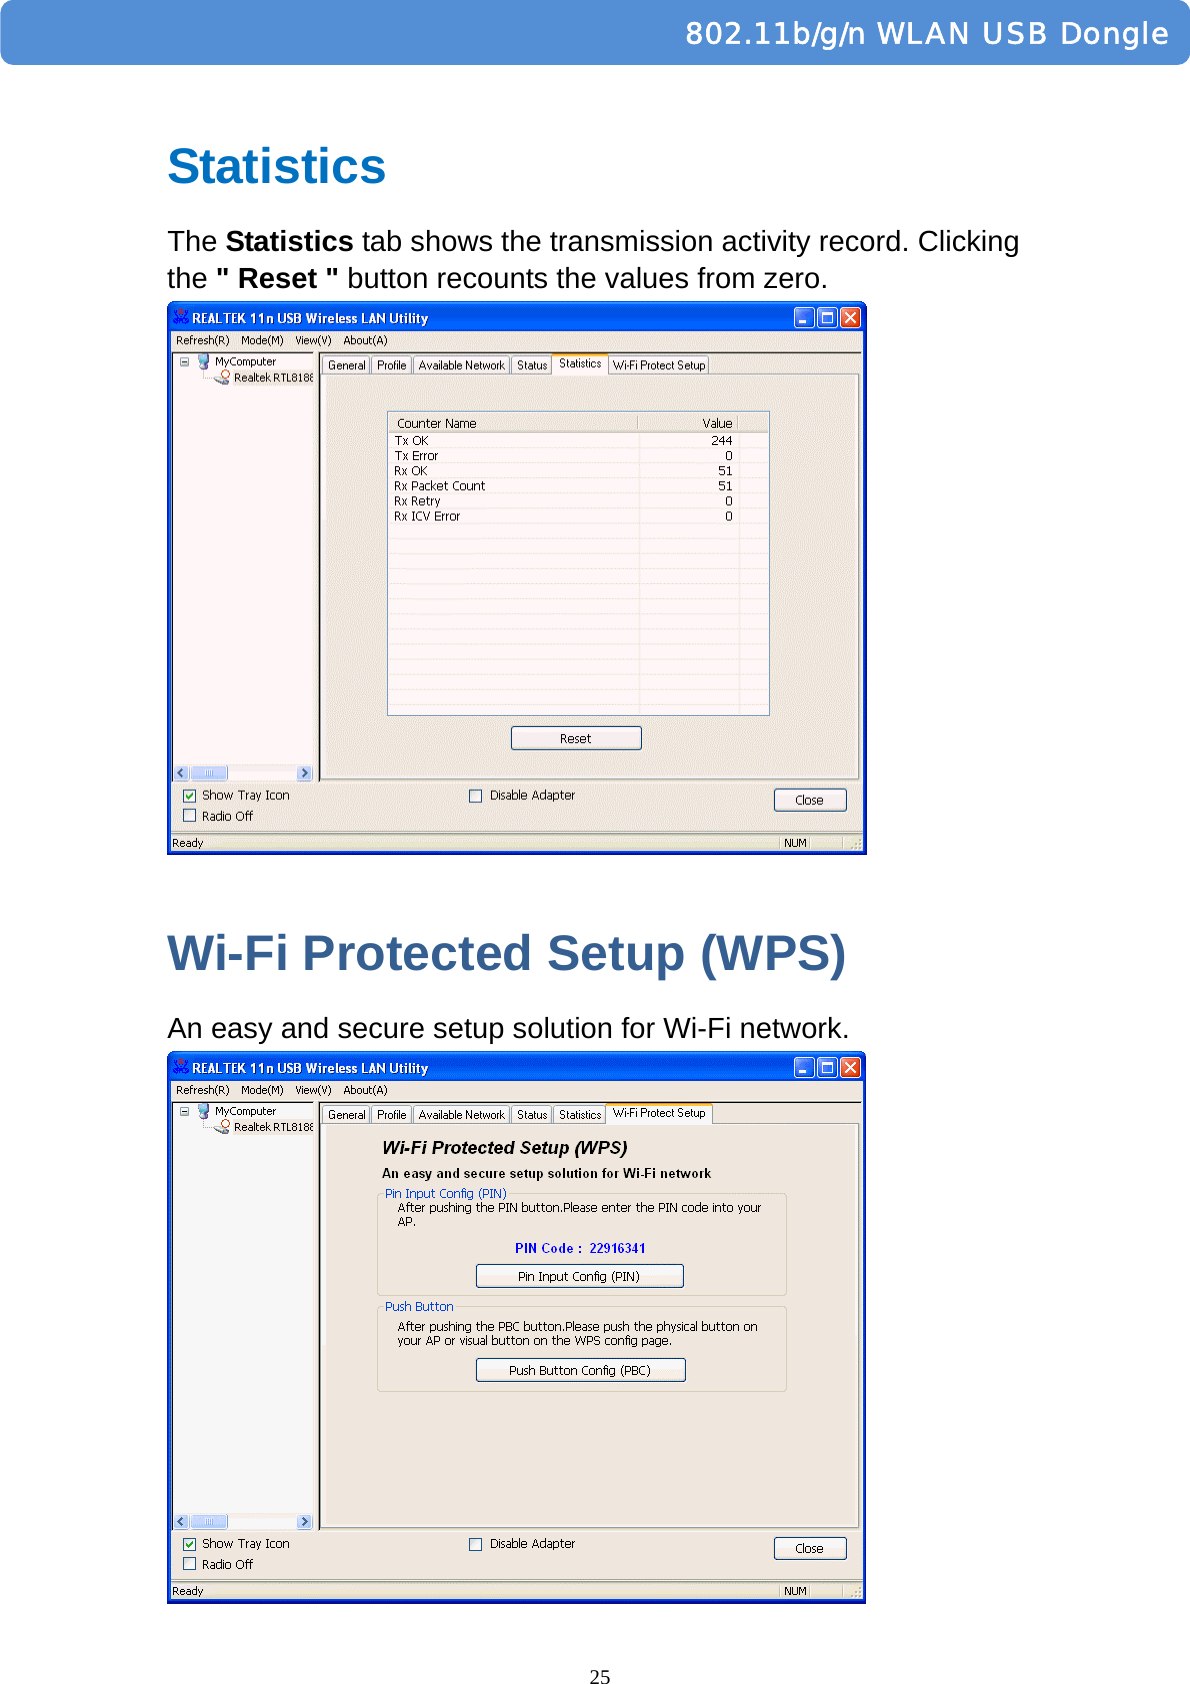  25         802.11b/g/n WLAN USB DongleStatistics The Statistics tab shows the transmission activity record. Clicking the &quot; Reset &quot; button recounts the values from zero.   Wi-Fi Protected Setup (WPS) An easy and secure setup solution for Wi-Fi network.  